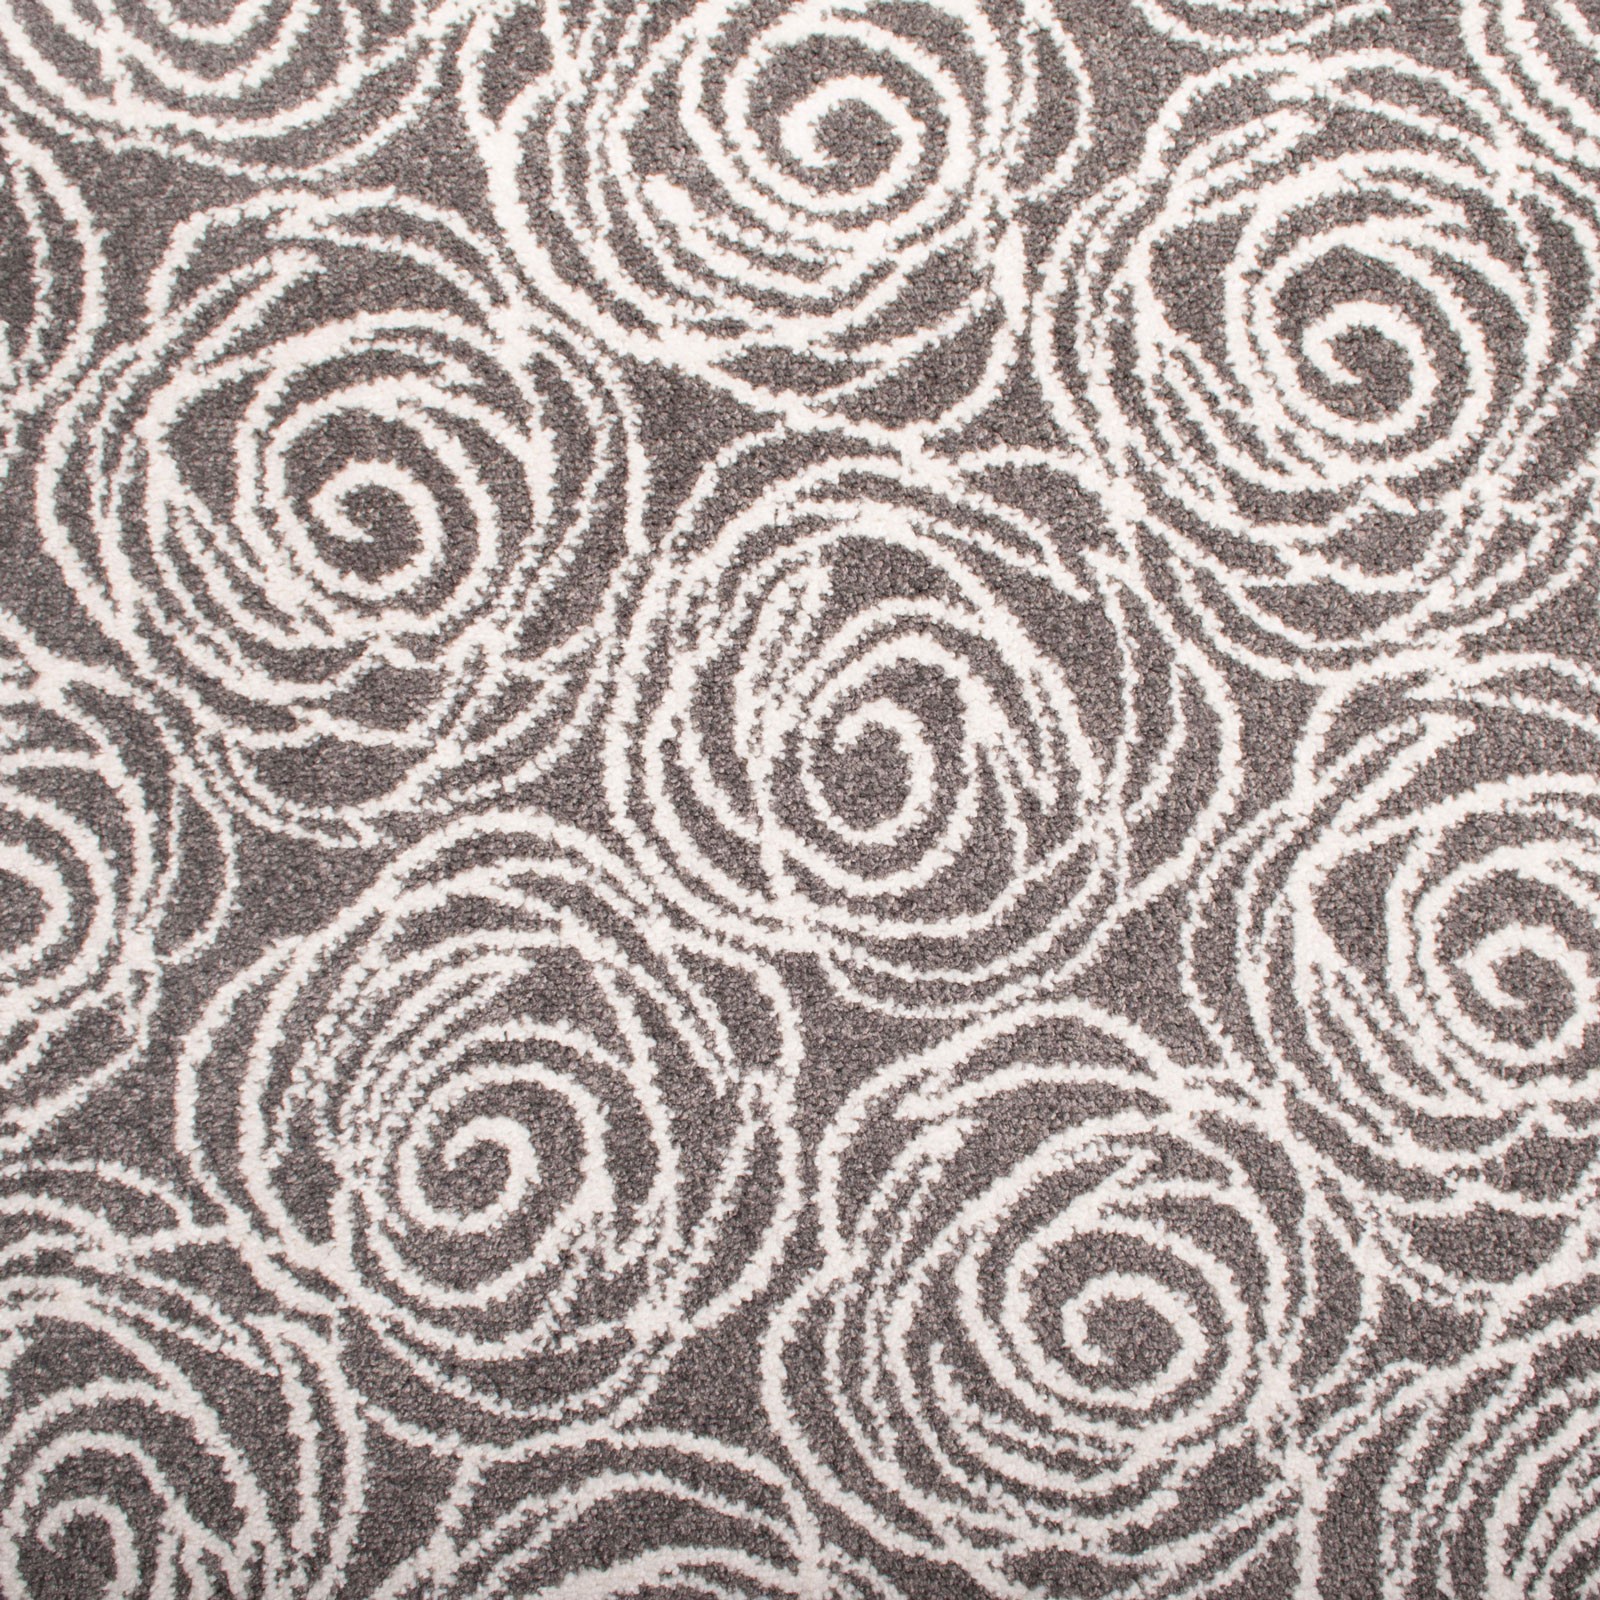 Patterned carpets are luxurious, dramatic and stylish – yonohomedesign.com